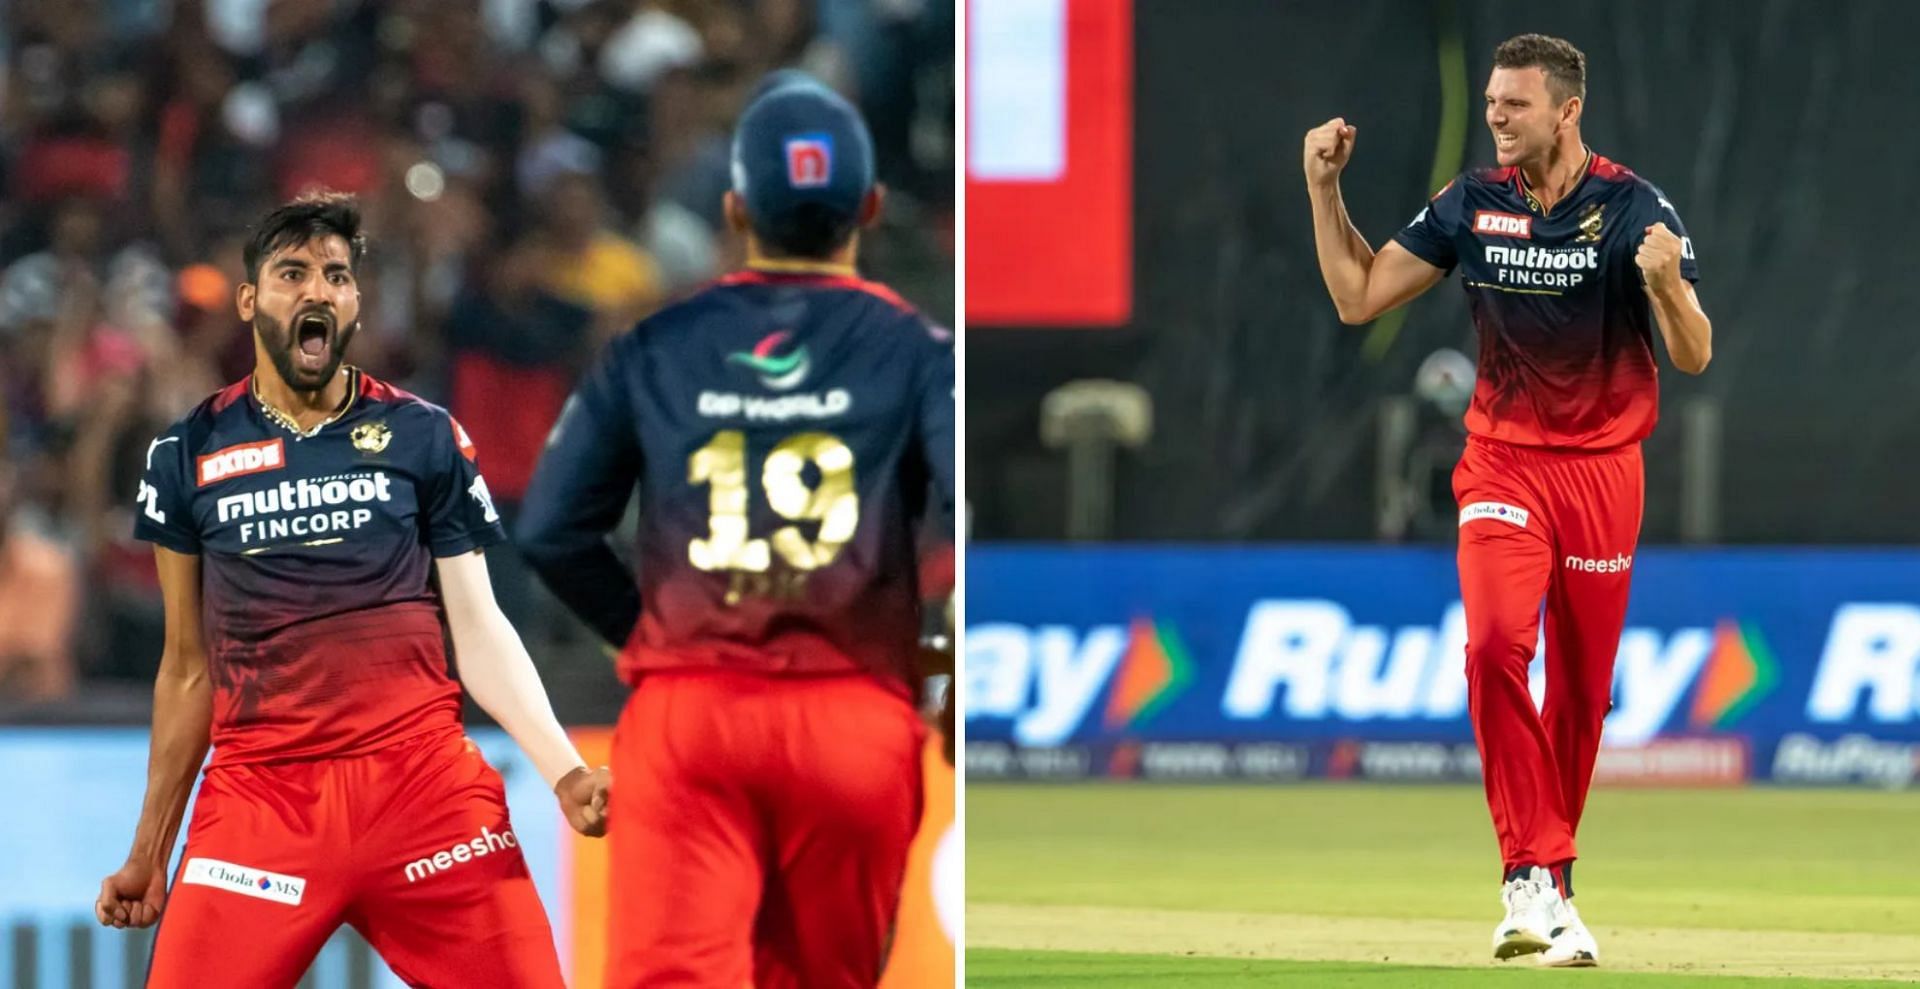 Mohammed Siraj pulled off a stunning catch to dismiss Jos Buttler (Credit: BCCI/IPL).